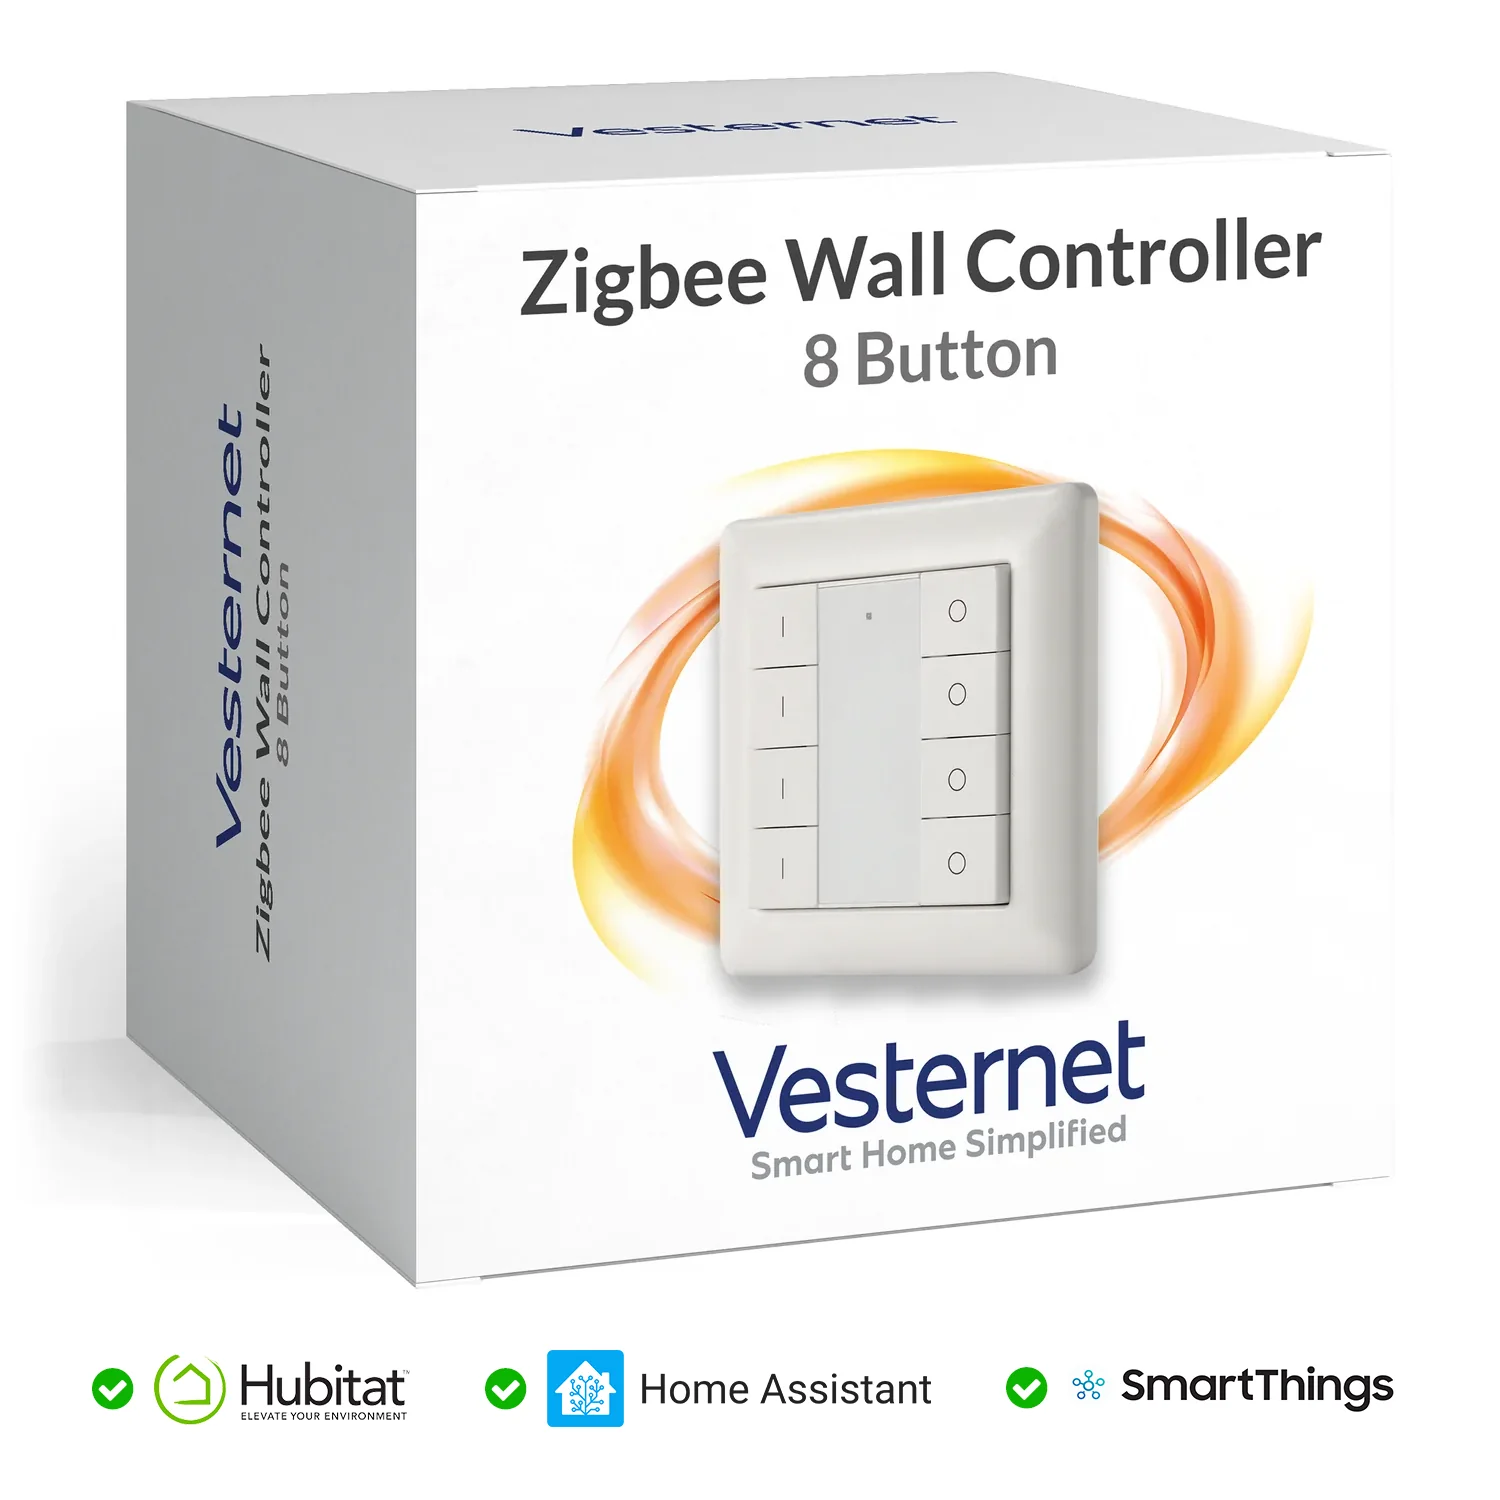 Will this connect to echoes built in zigbee hub to control light routines